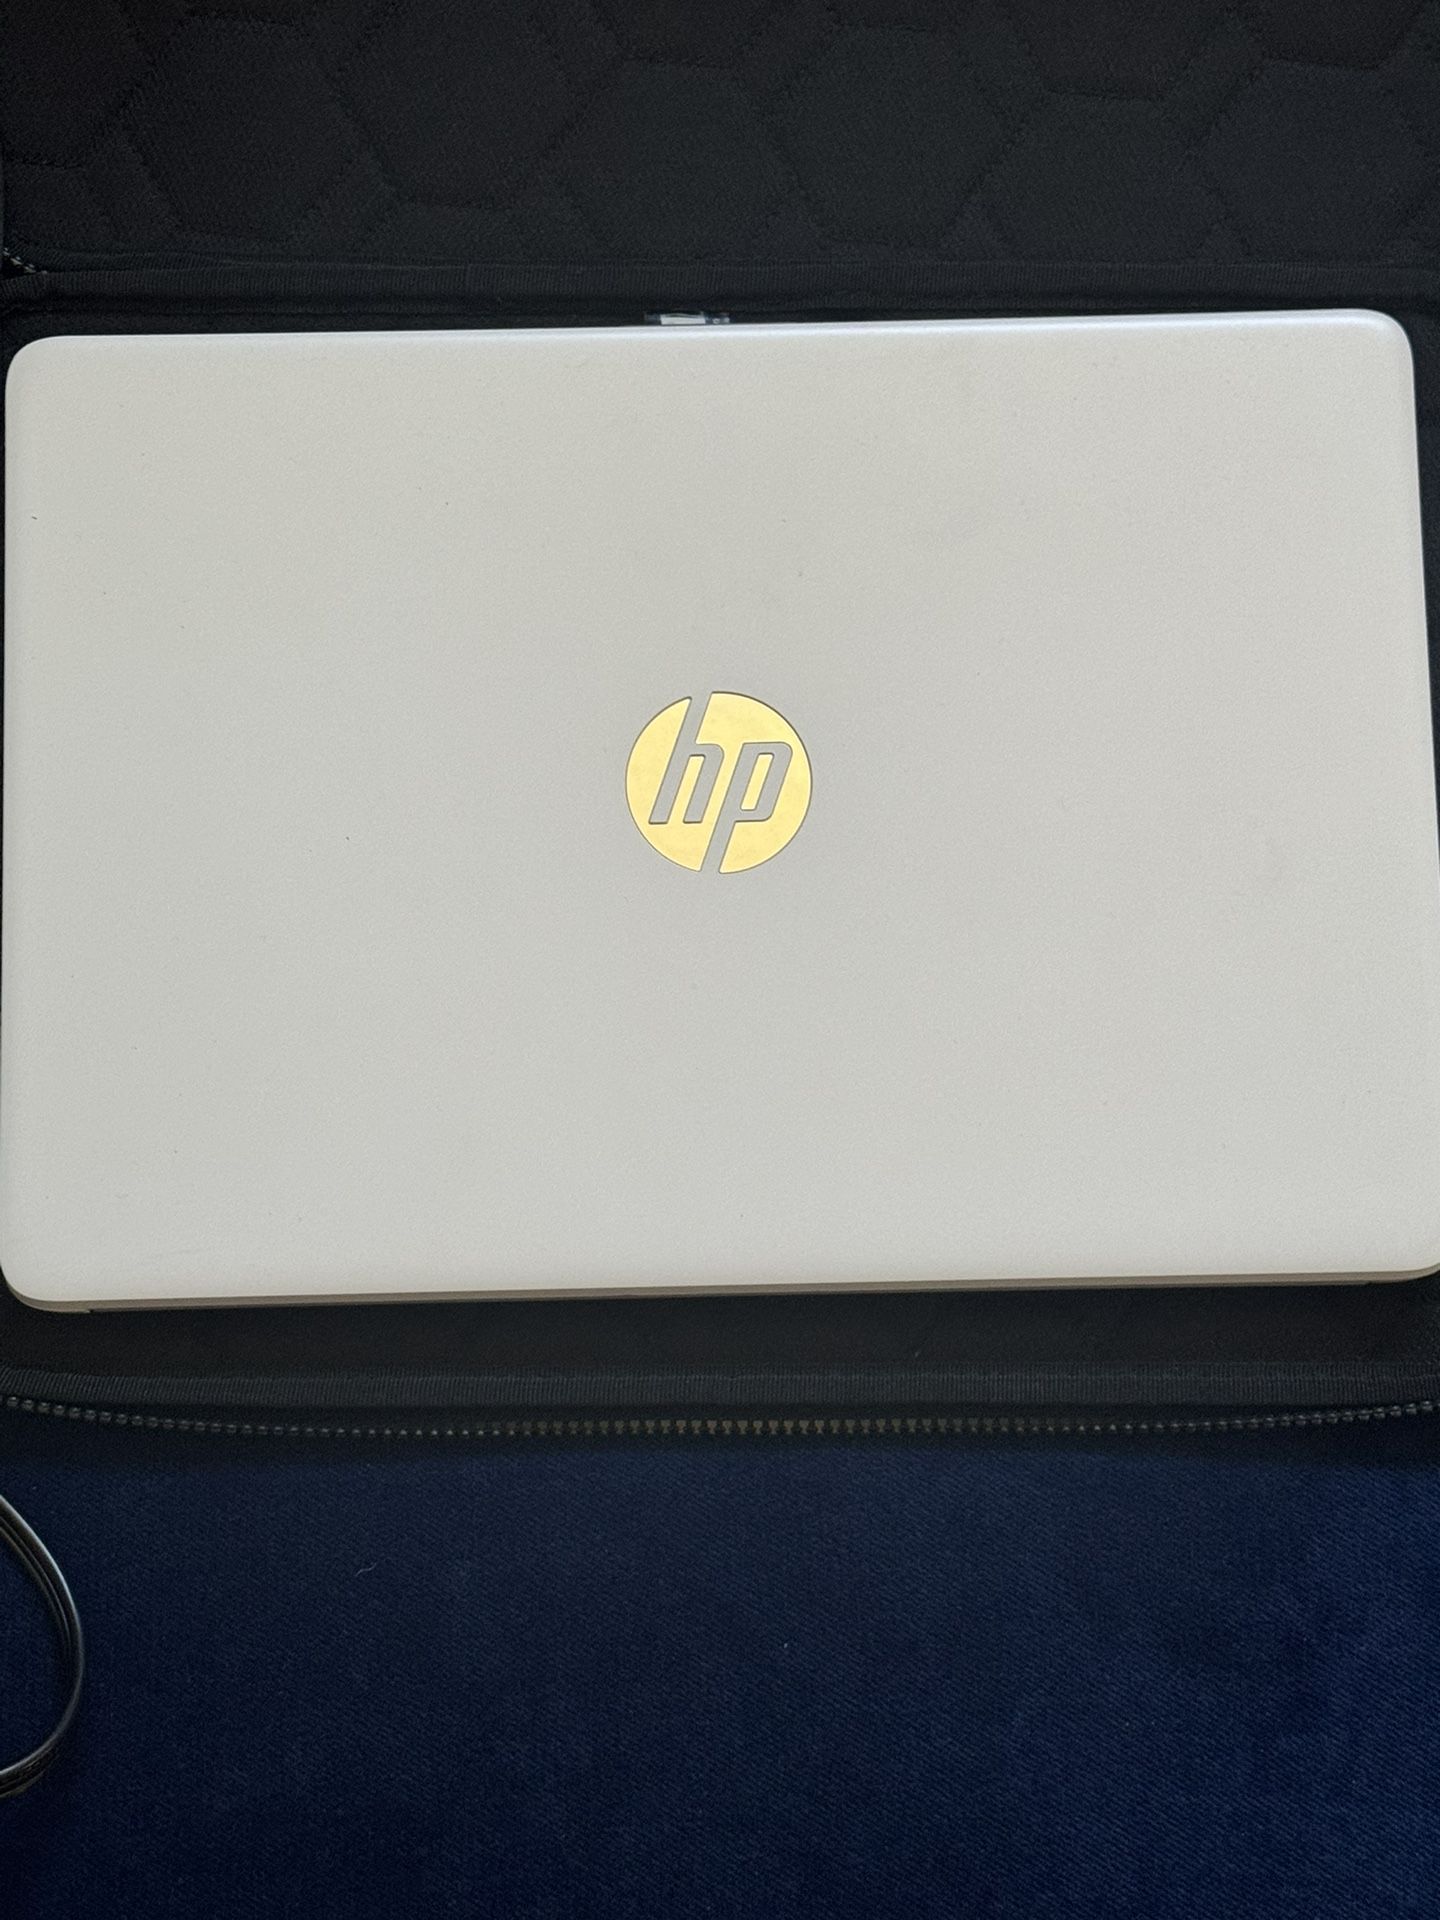 HP Stream 14" HD BrightView Laptop (New)